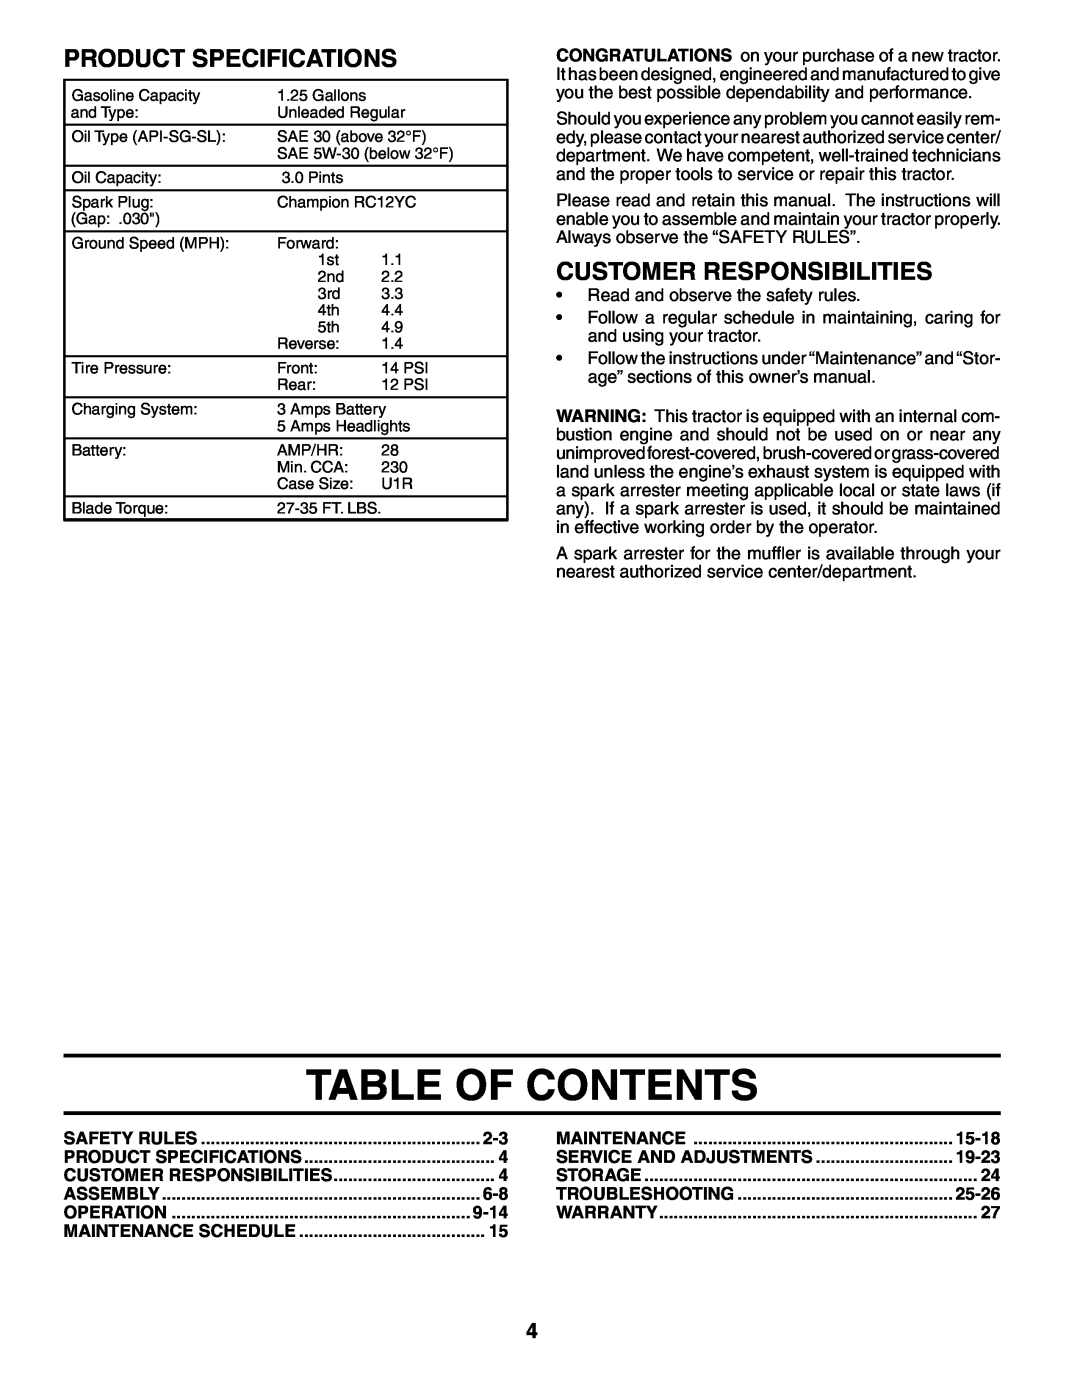 Weed Eater 96016000100 manual Table Of Contents, Product Specifications, Customer Responsibilities 